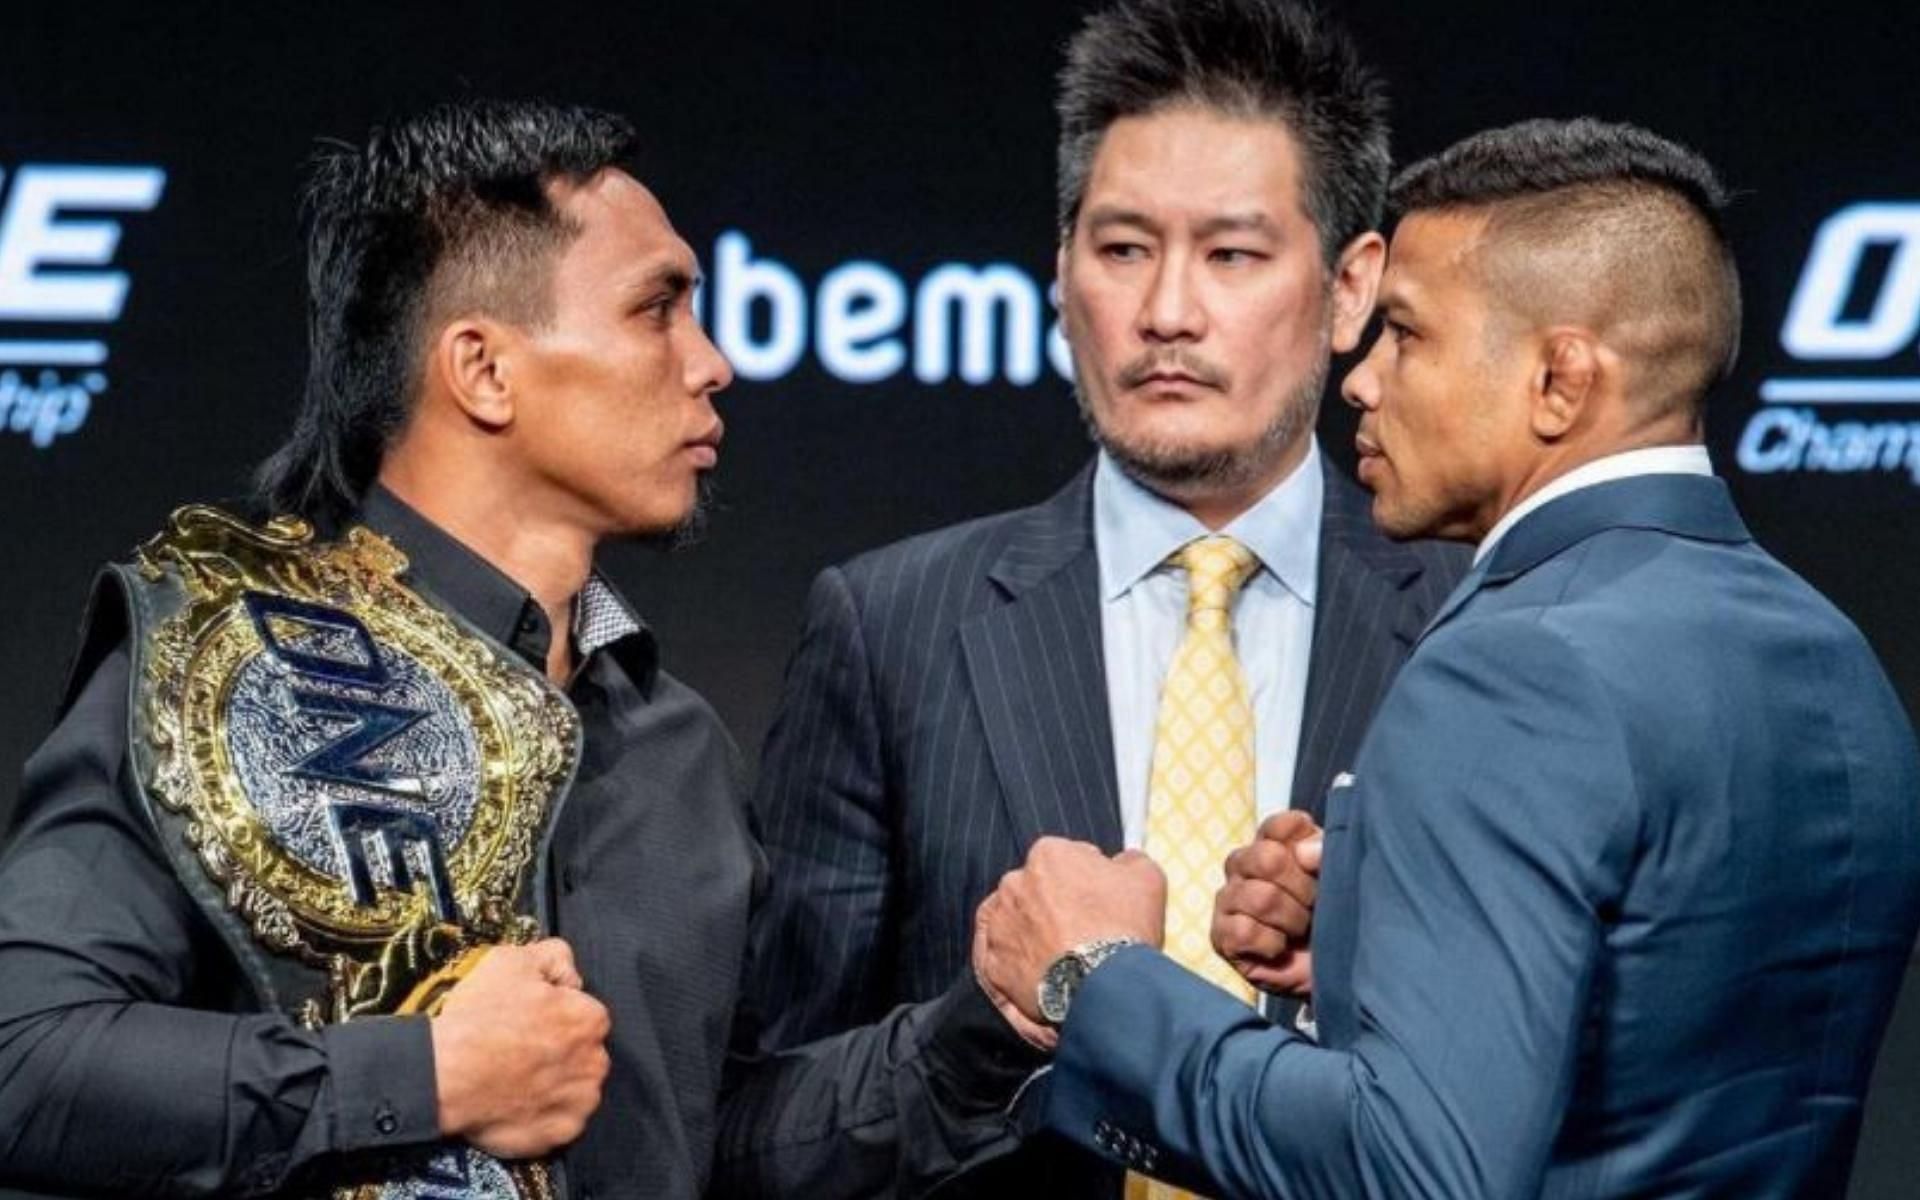 Kevin Belingon (left) and Bibiano Fernandes (right) had one of the most storied rivalries in ONE Championship history. (Credits: @bibianofernandes via Instagram)